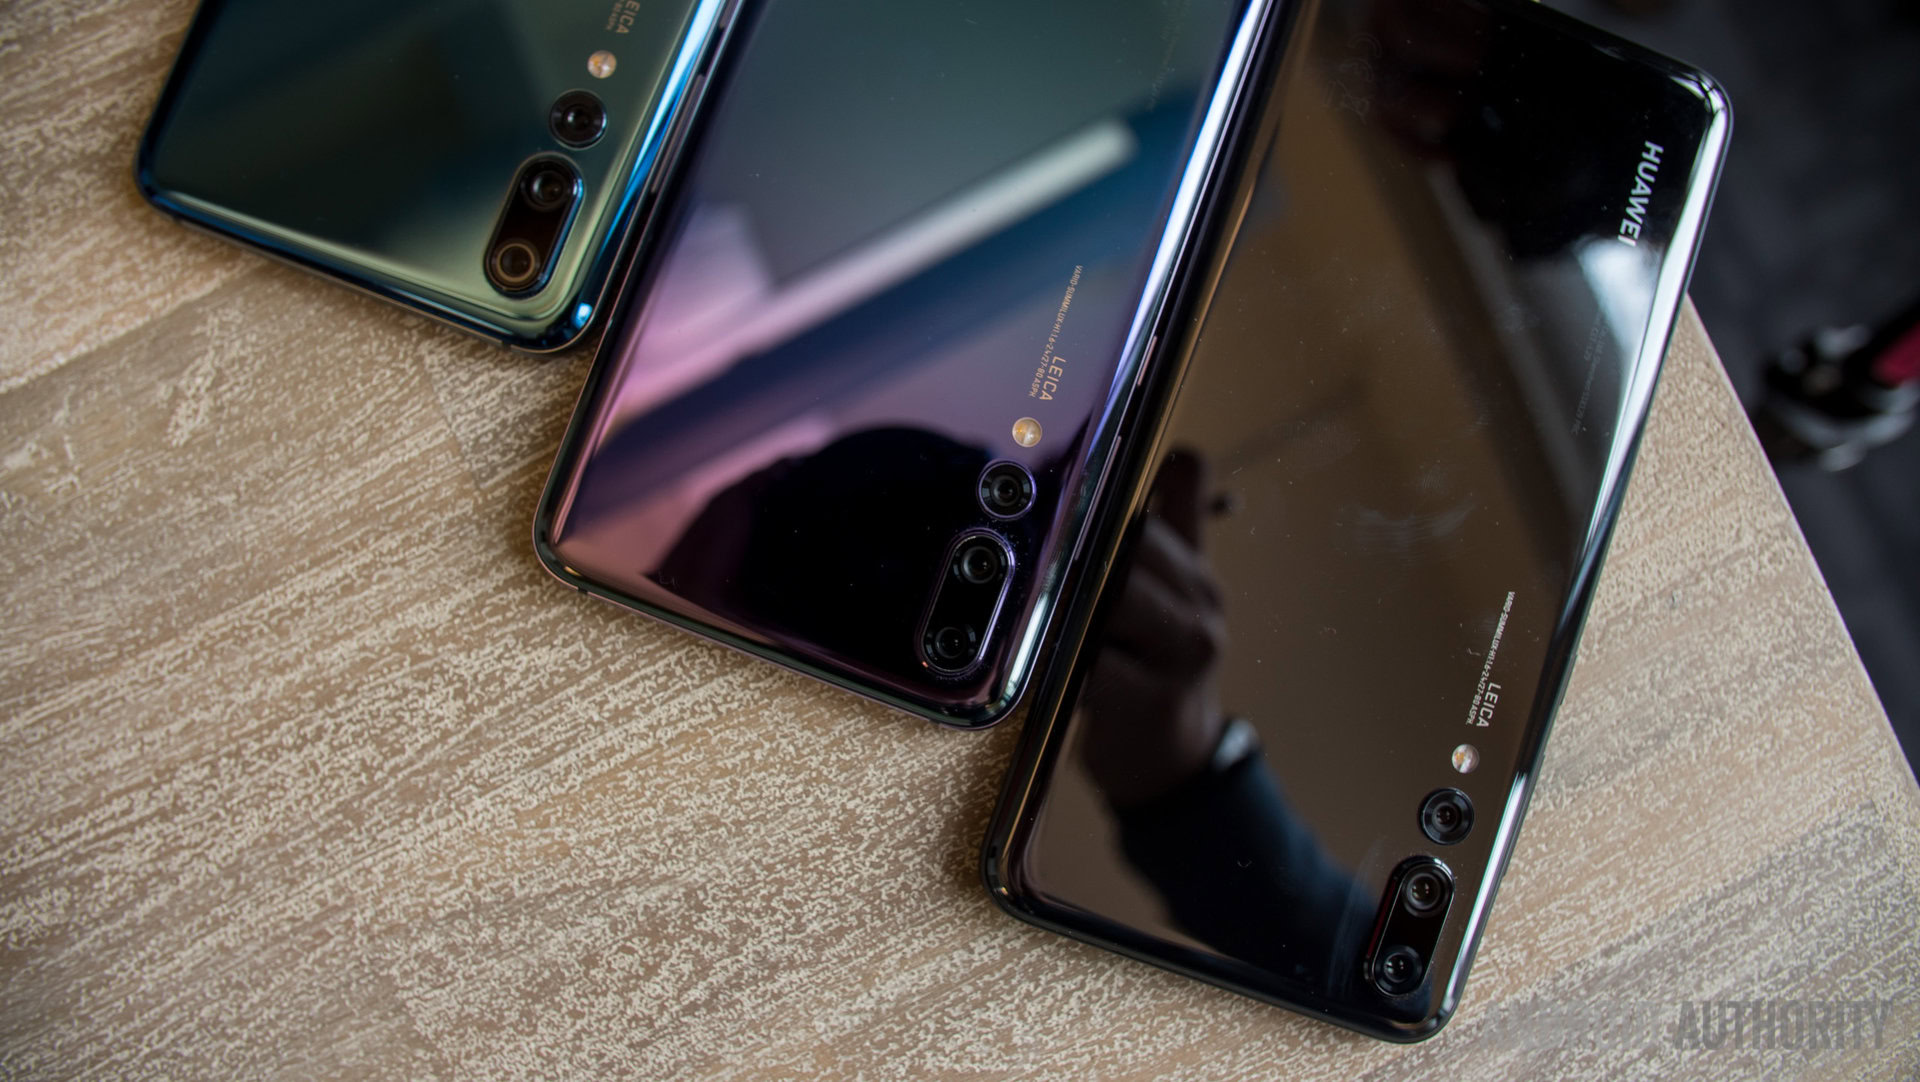 HUAWEI P20 features: All-new design, triple Leica cameras, and more